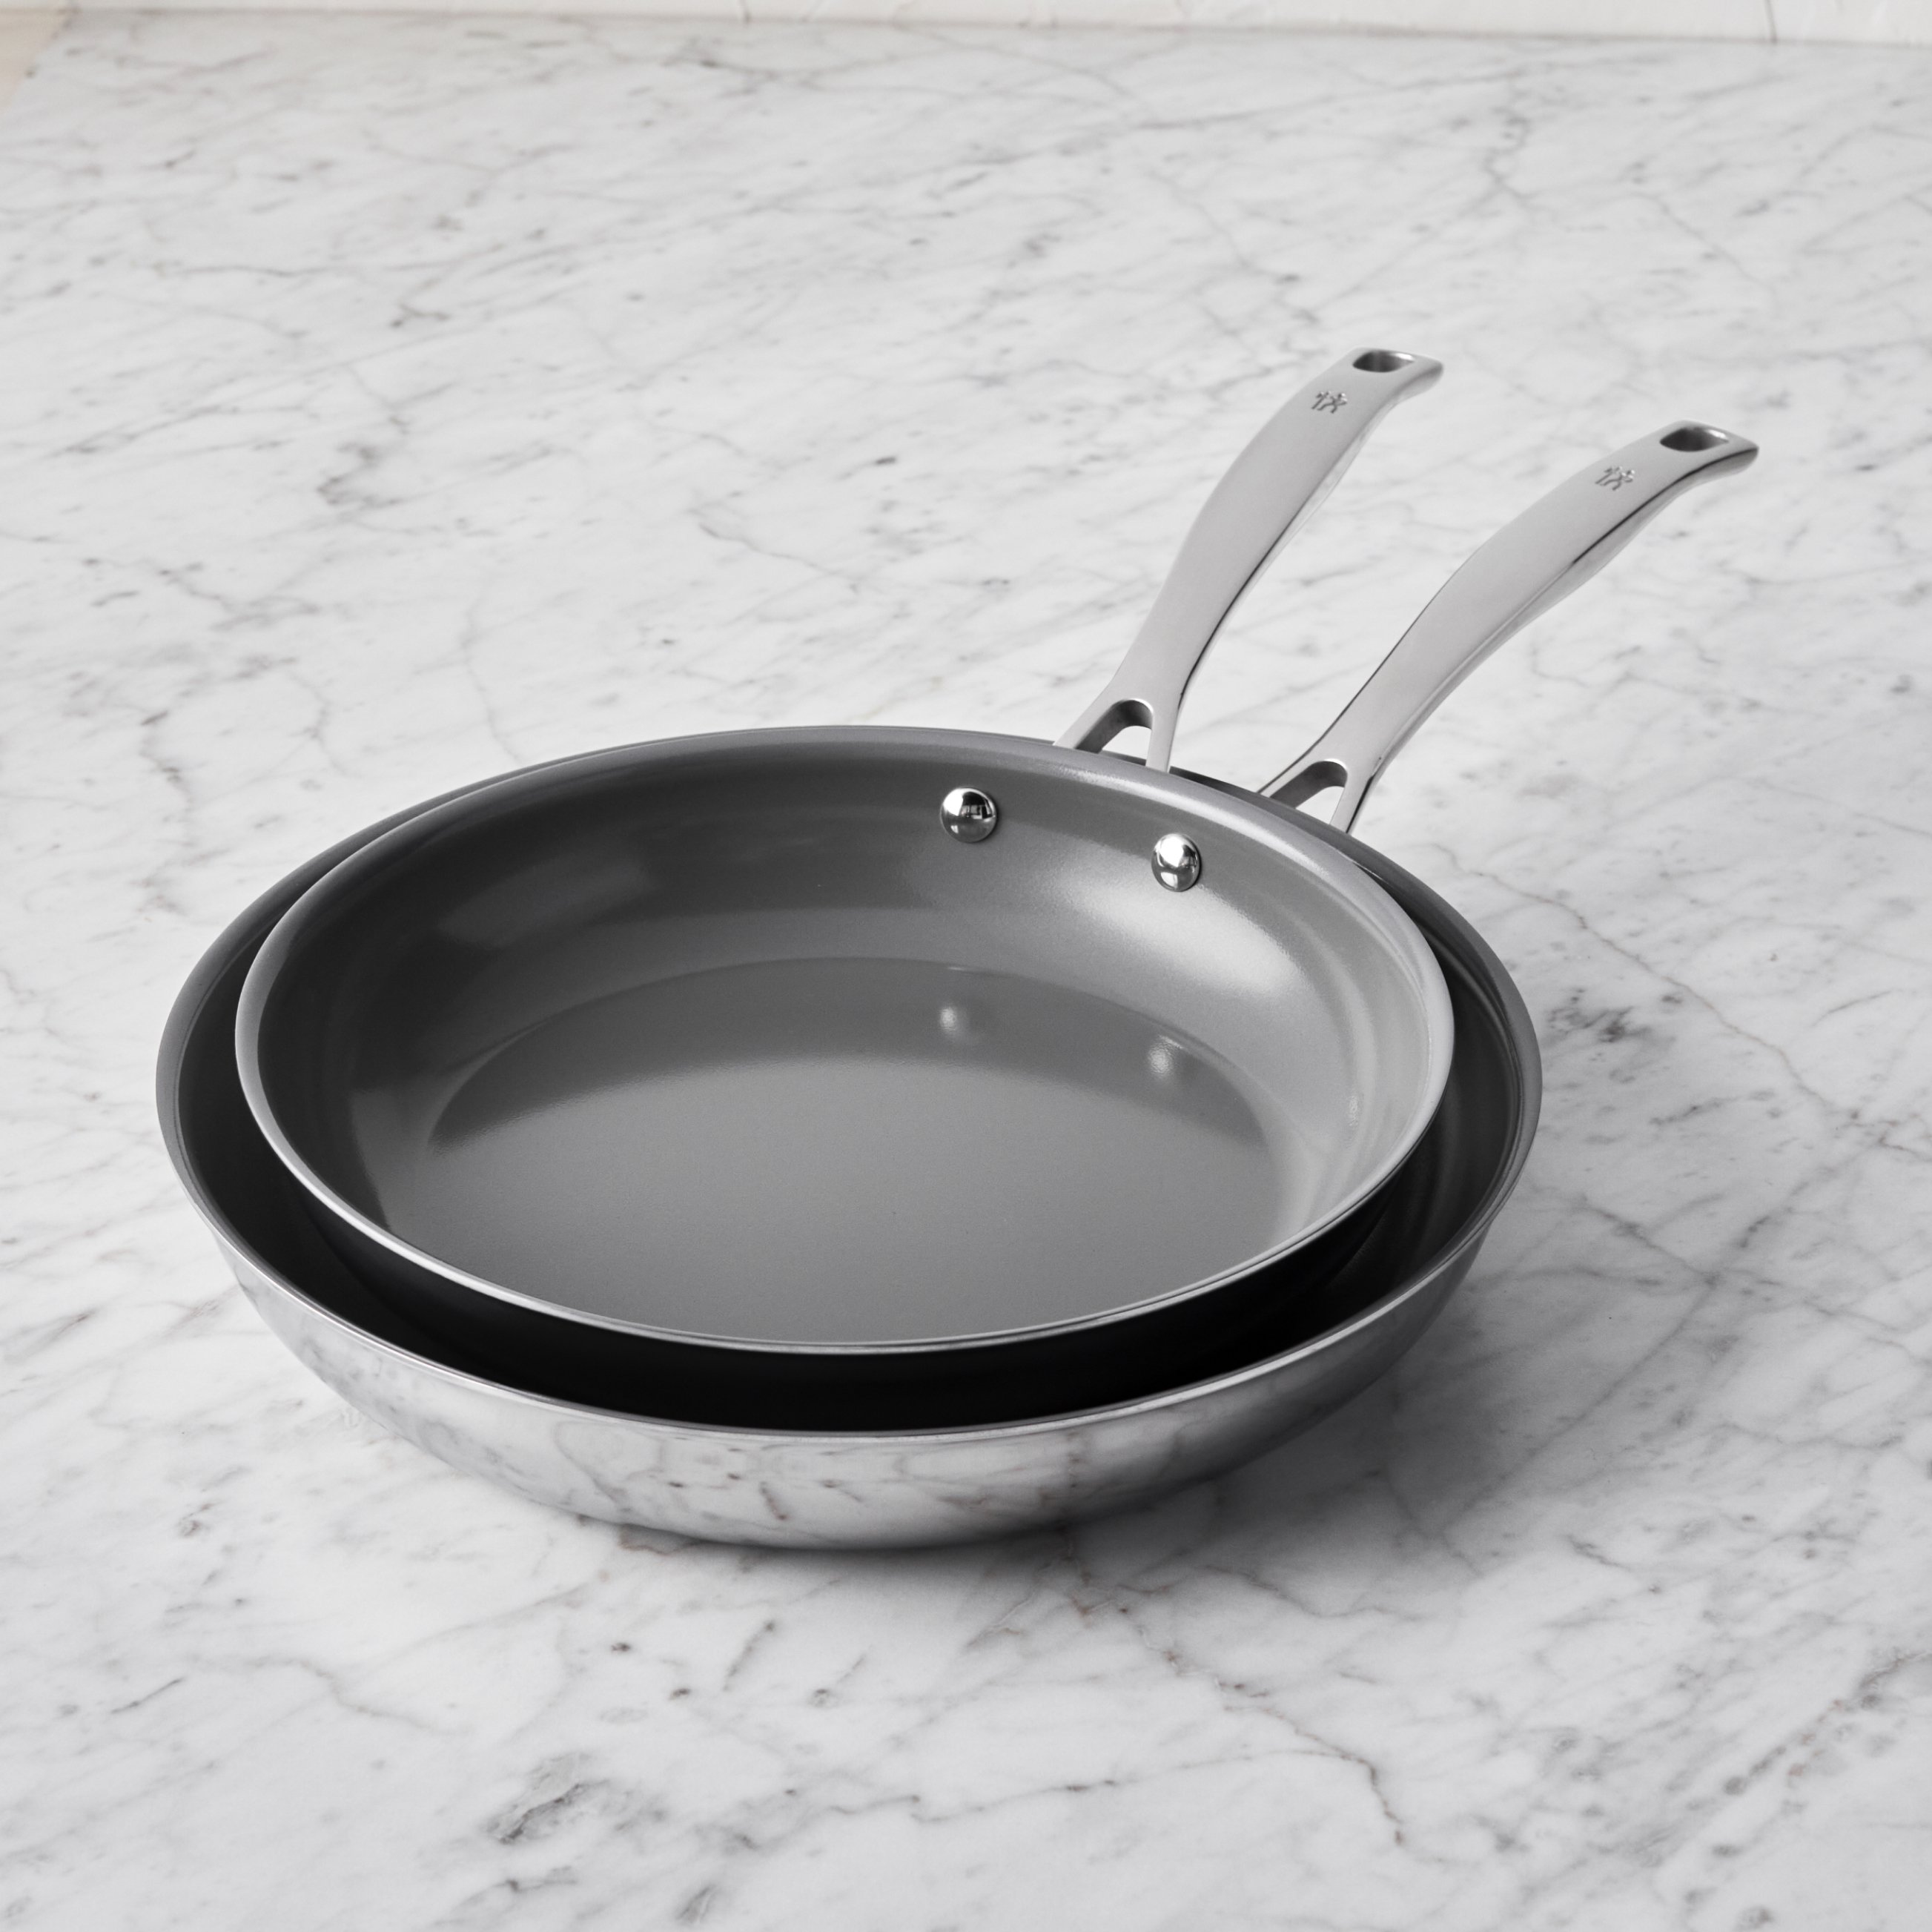 https://www.zwilling.com/on/demandware.static/-/Sites-zwilling-us-Library/default/dw96b658ba/images/product-content/masonry-content/henckels/cookware/henckels-h3/H3COATED_03.jpg